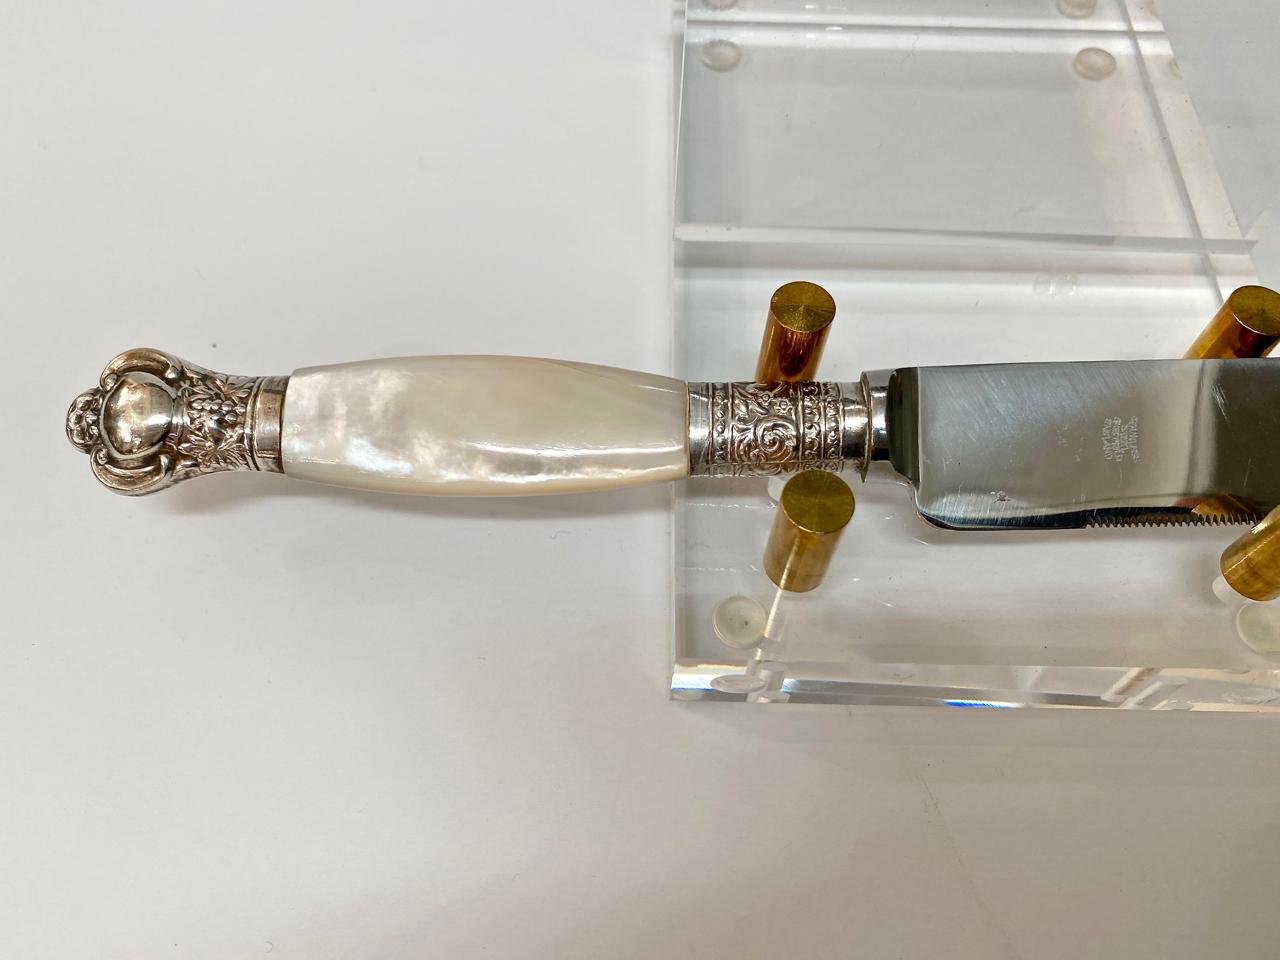 This is a beautiful example of a mother of pearl handled cake or possibly carving knife. The knife is detailed with a sterling collar and finial. The stainless steel blade is in very good condition. This would make a beautiful wedding cake knife.